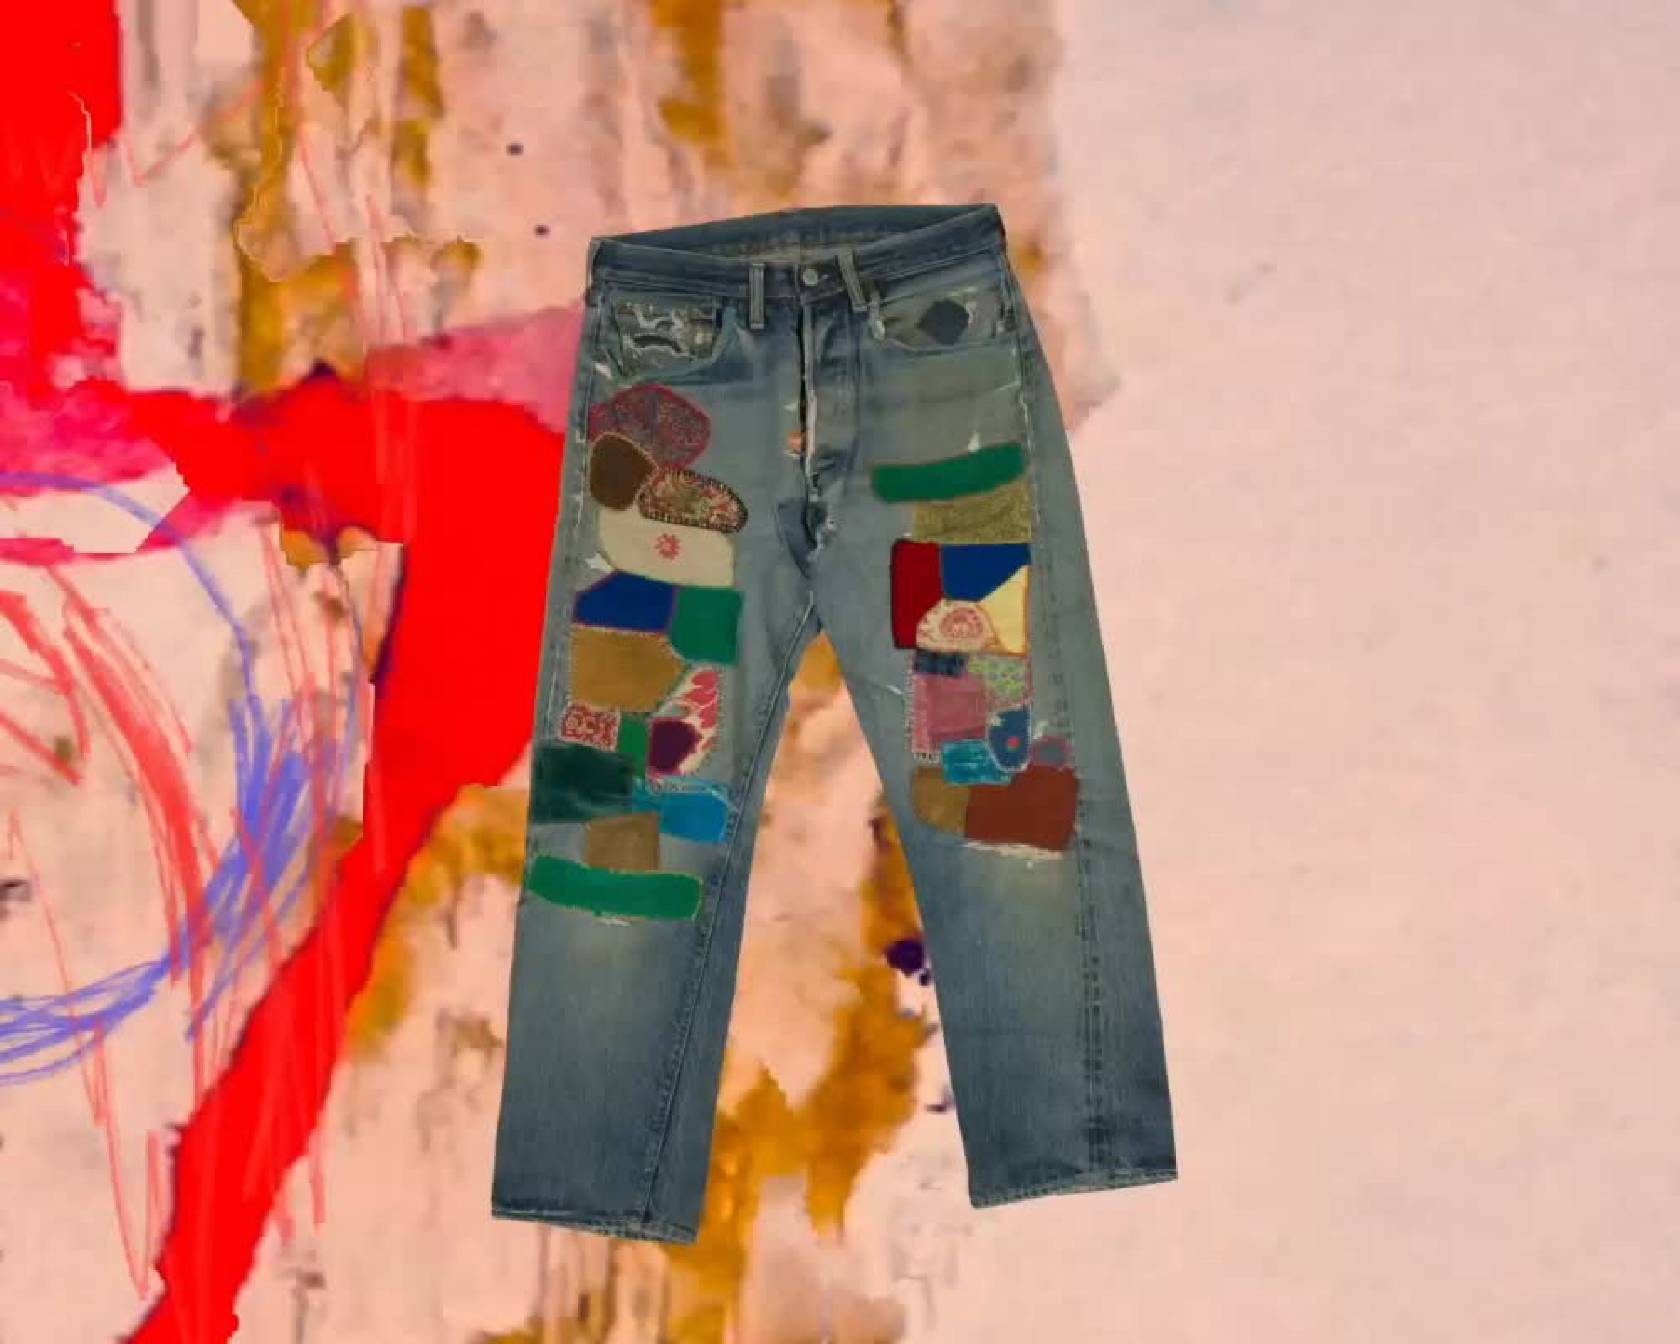 Video of customized 501 jeans with fun design and patchwork, and people wearing 501 jeans.